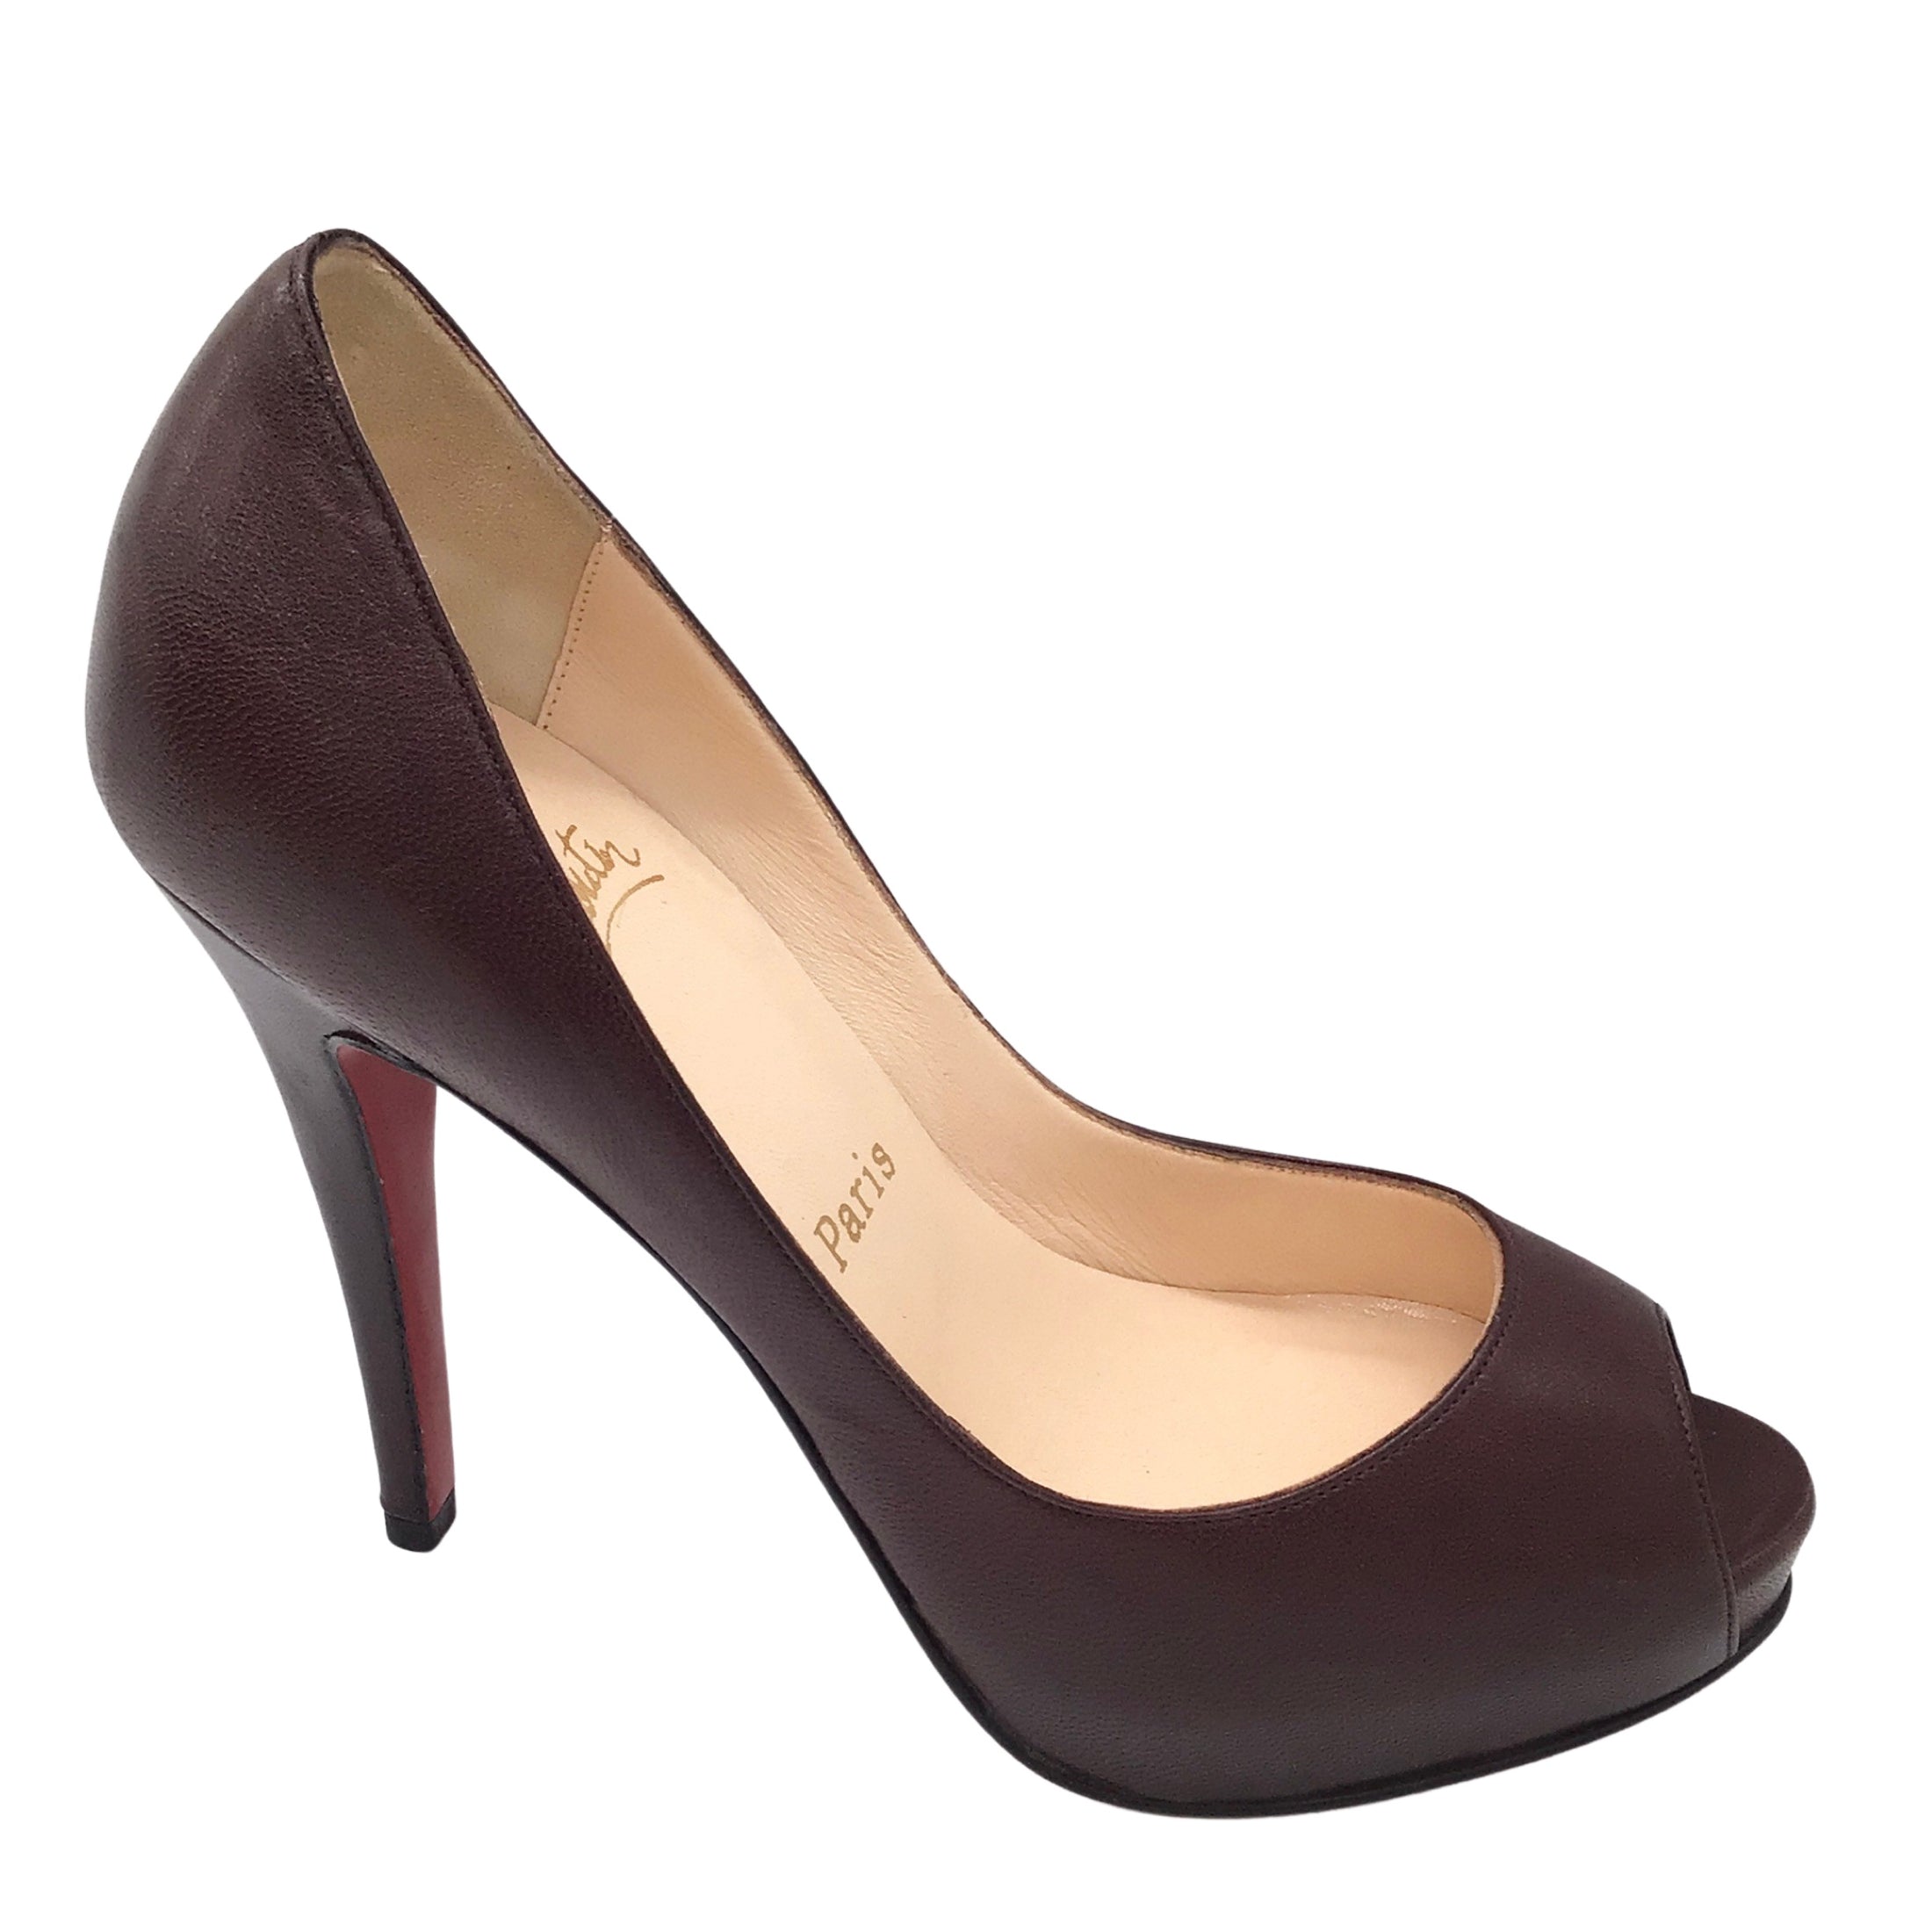 Christian Louboutin Brown Very Prive 120 Peep Toe Leather Pumps